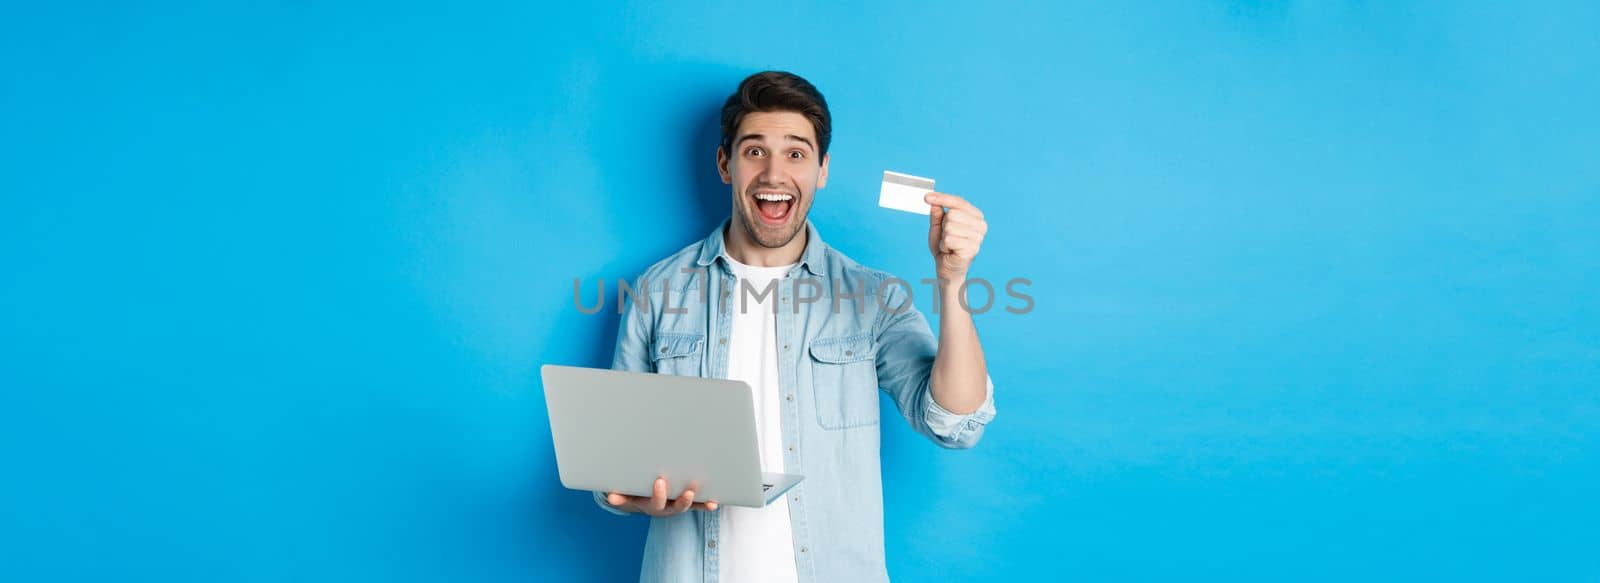 Excited man shop online, showing credit card and holding laptop, buying in internet, standing over blue background.